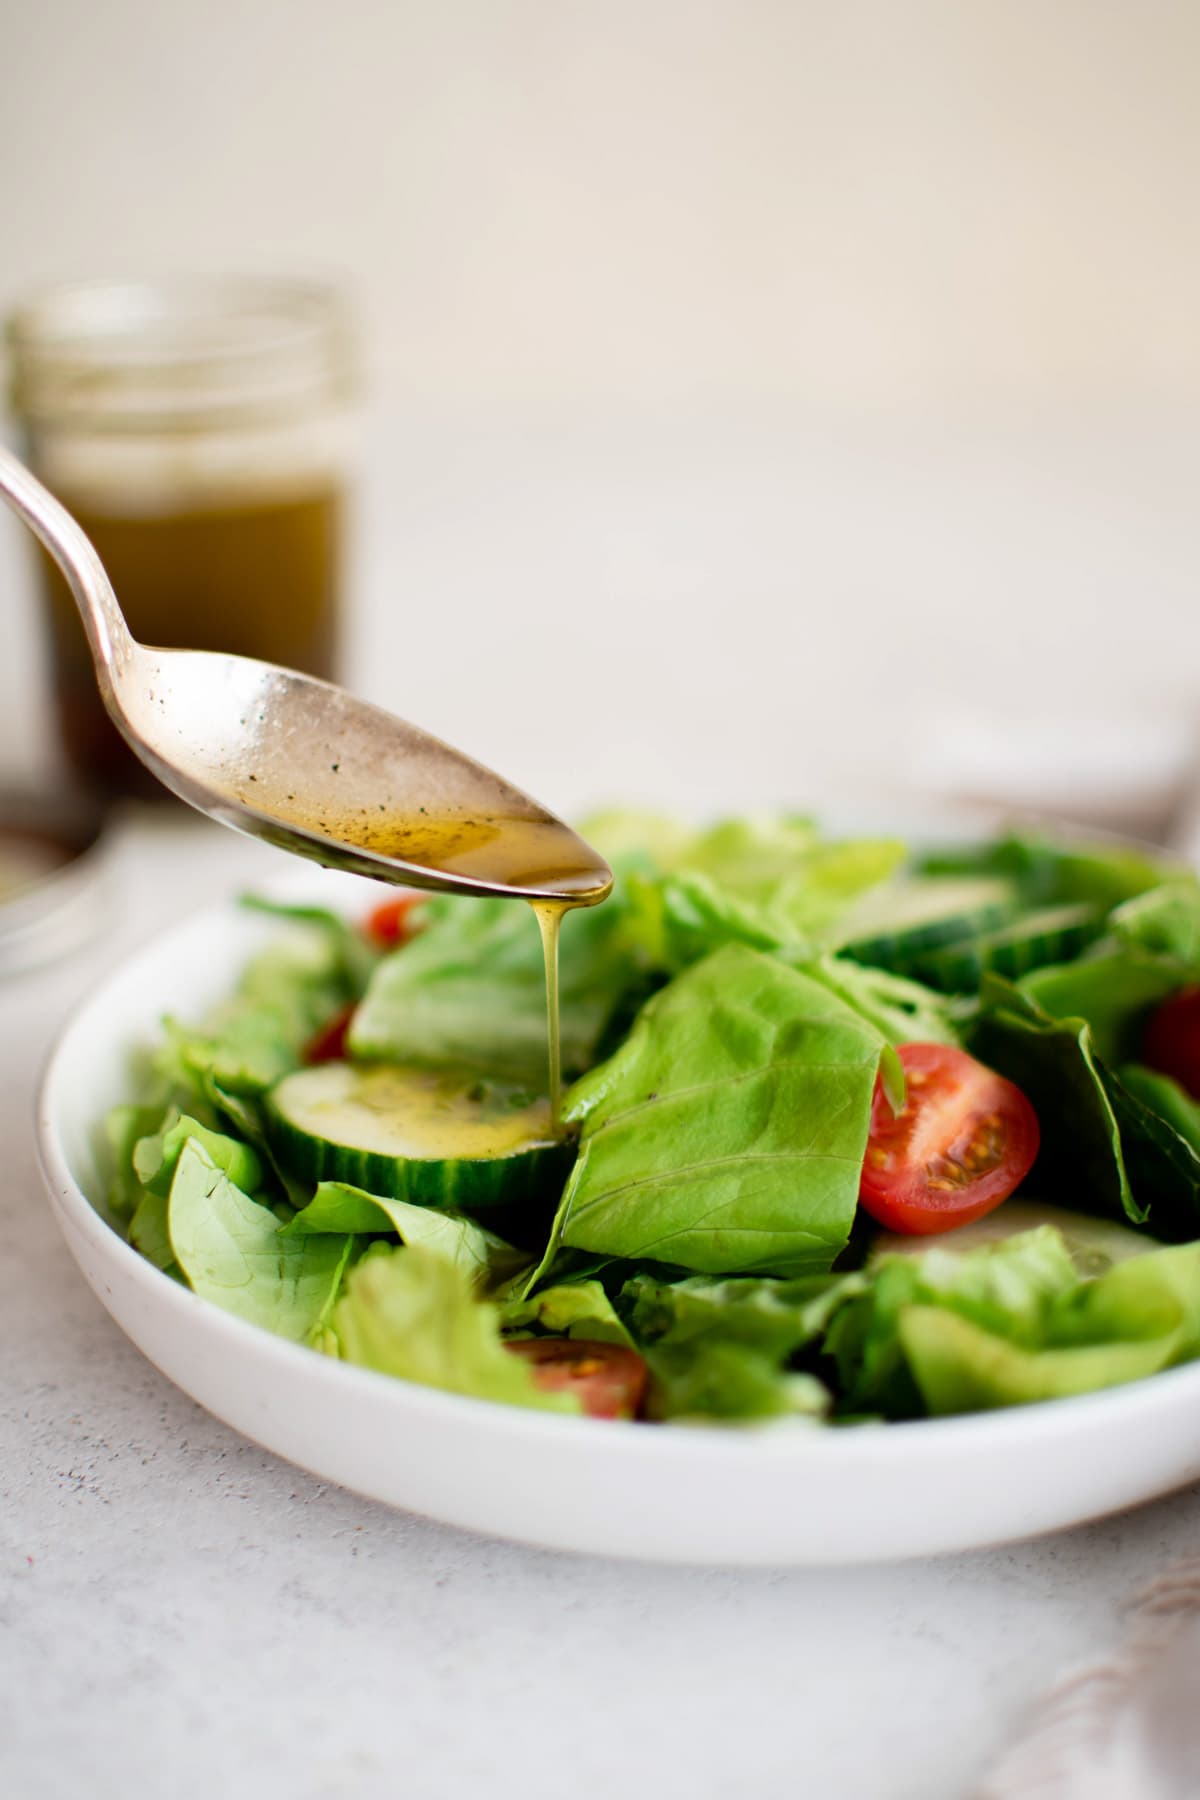 Oil and vinegar dressing drizzled over a salad with a spoon.